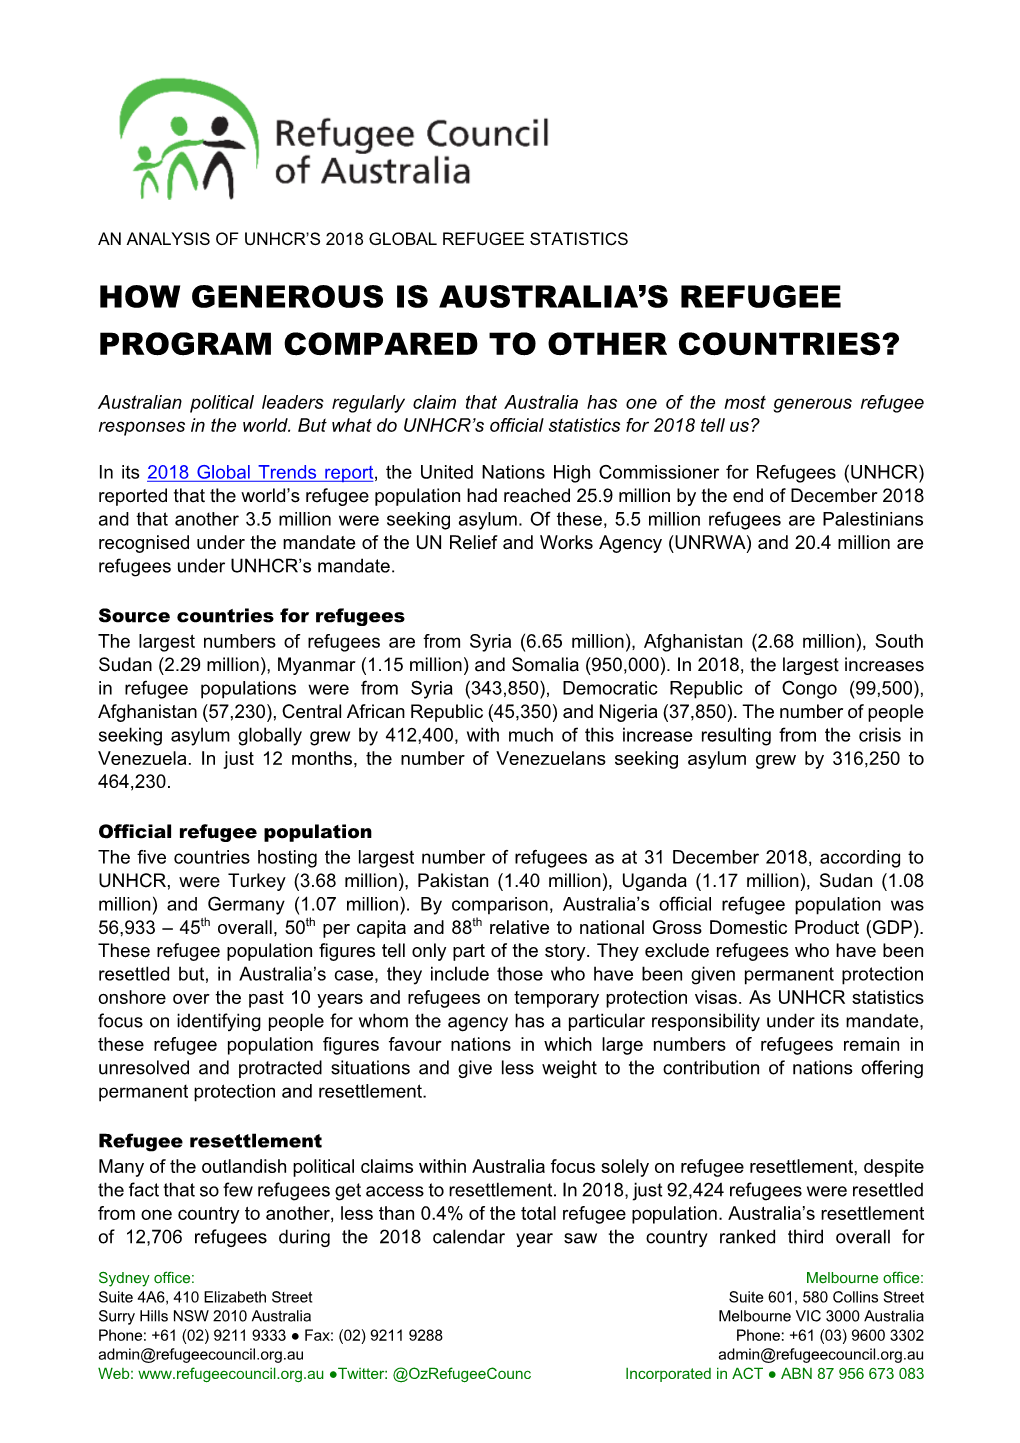 How Generous Is Australia's Refugee Program Compared to Other